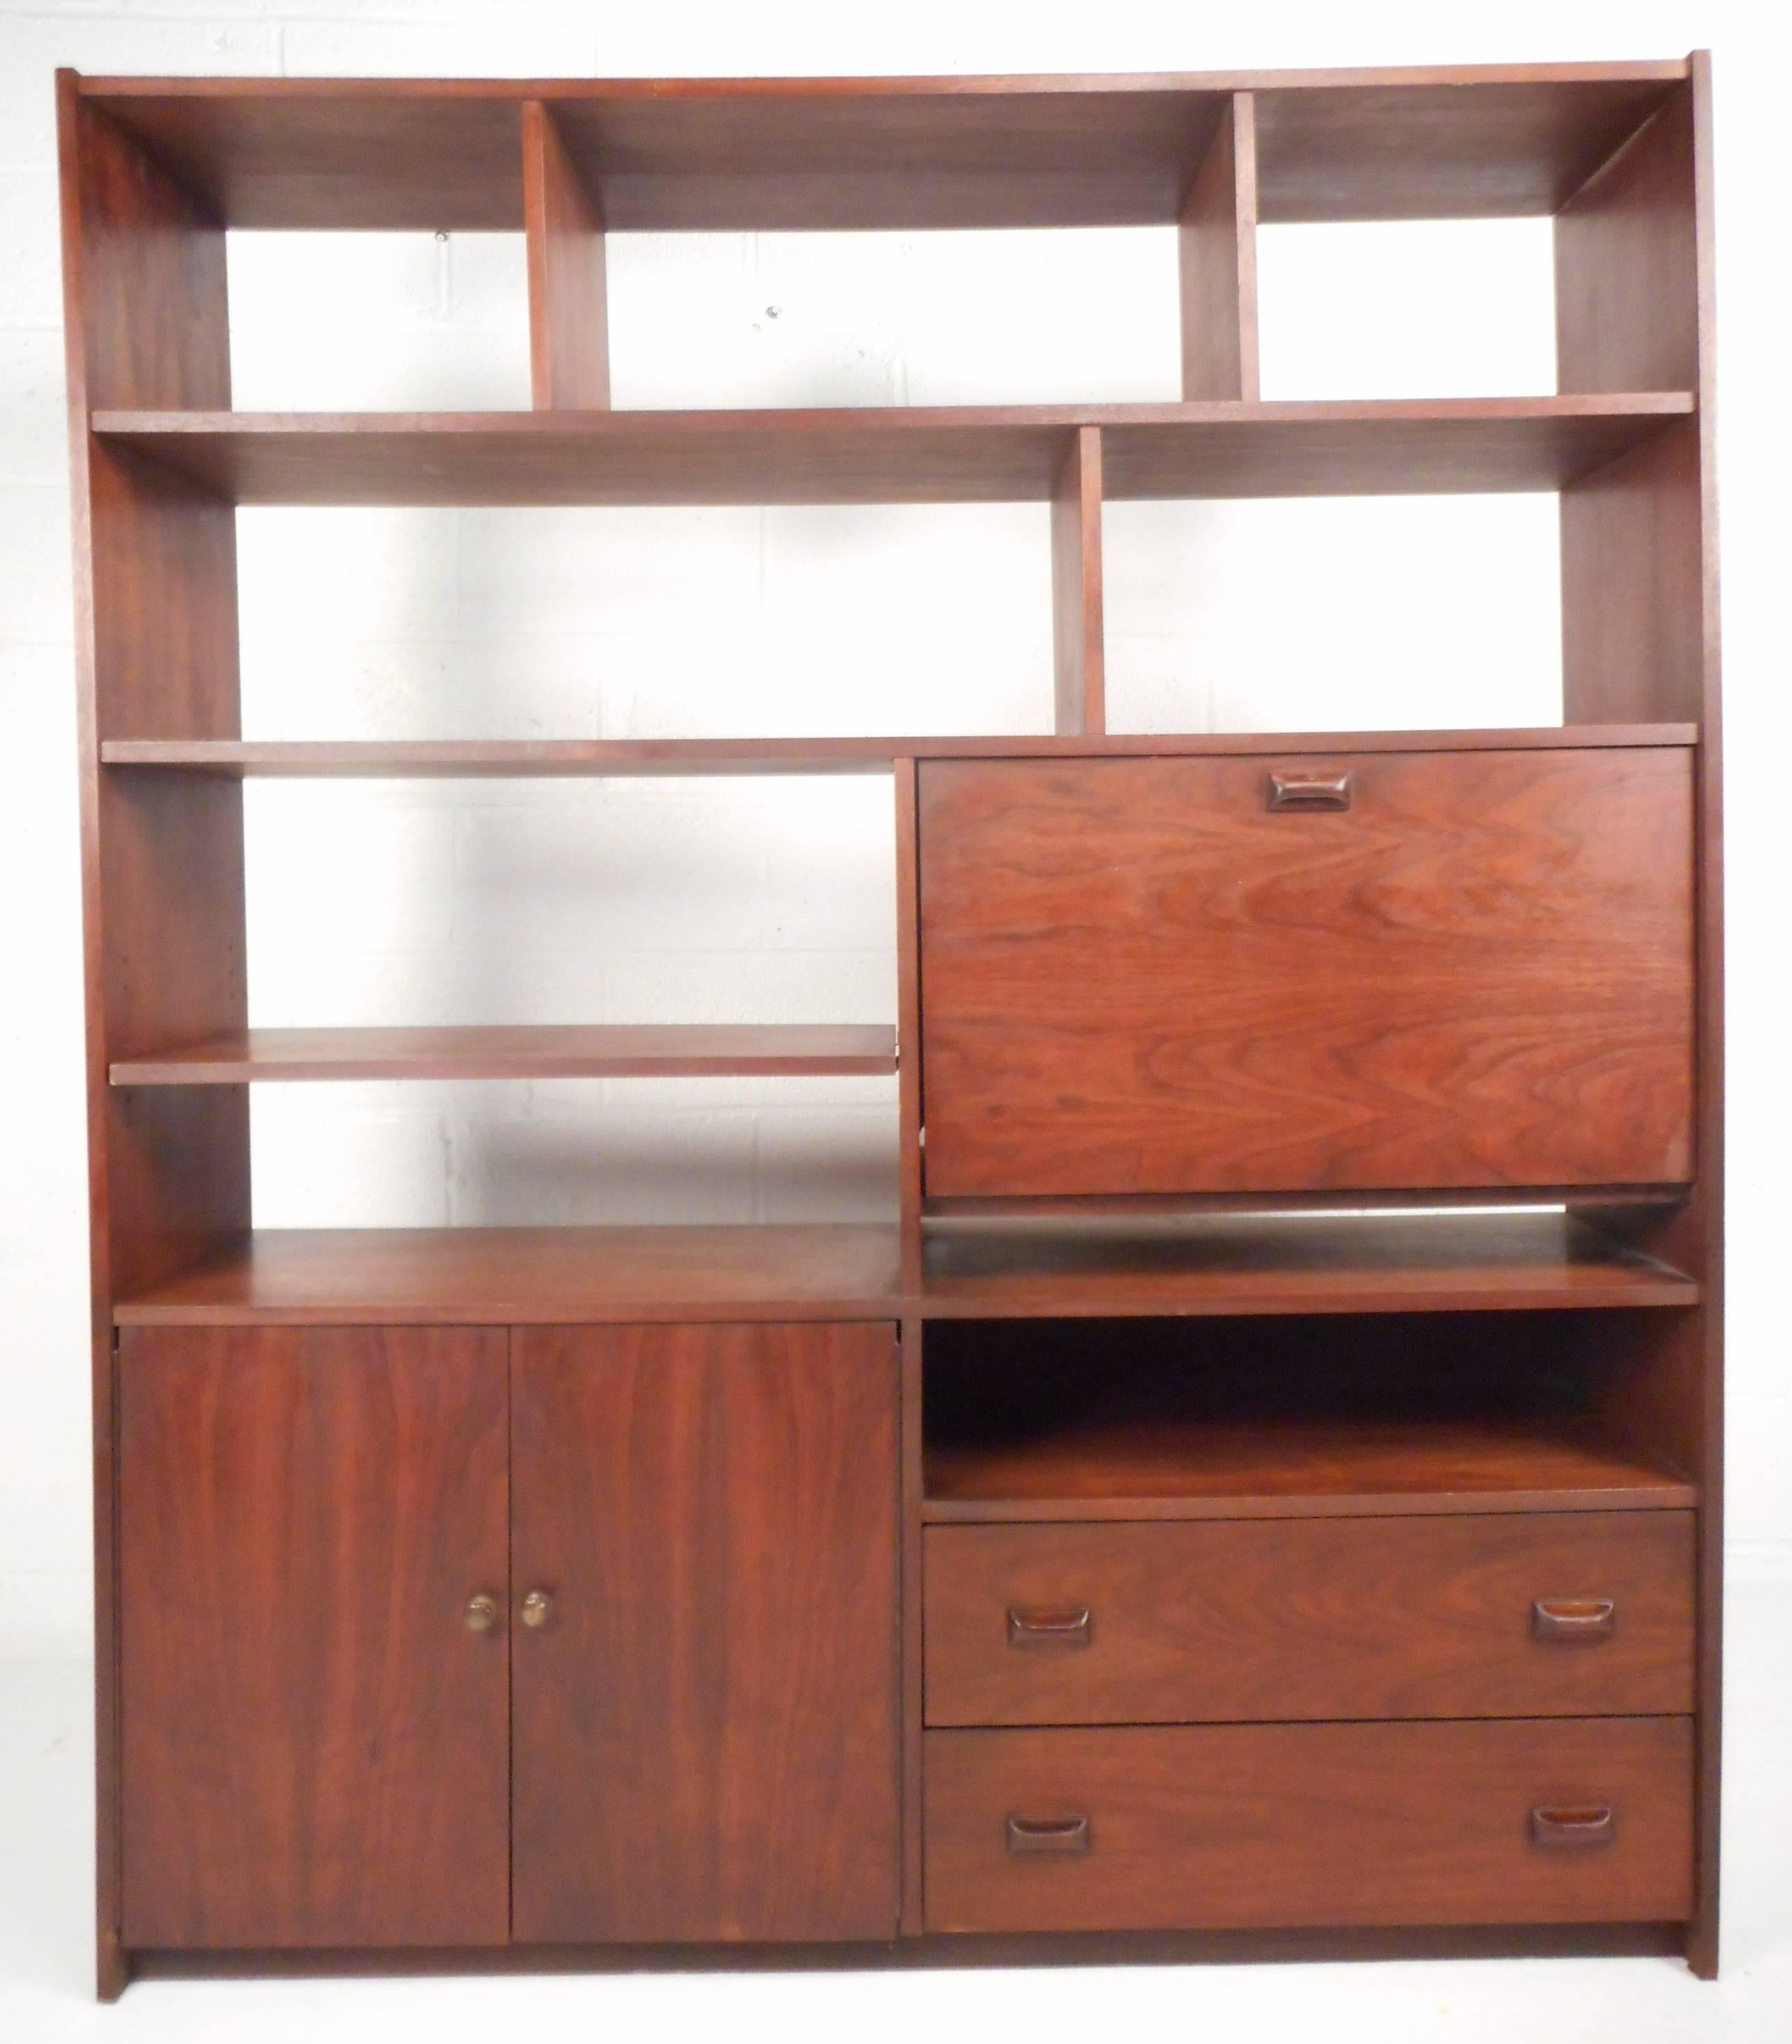 This impressive vintage modern book shelf features nine visible shelves, two hefty drawers, a drop down formica top table and two cabinet doors hiding another shelf. Stunning design offers a plenty of room for storage and display. Gorgeous walnut